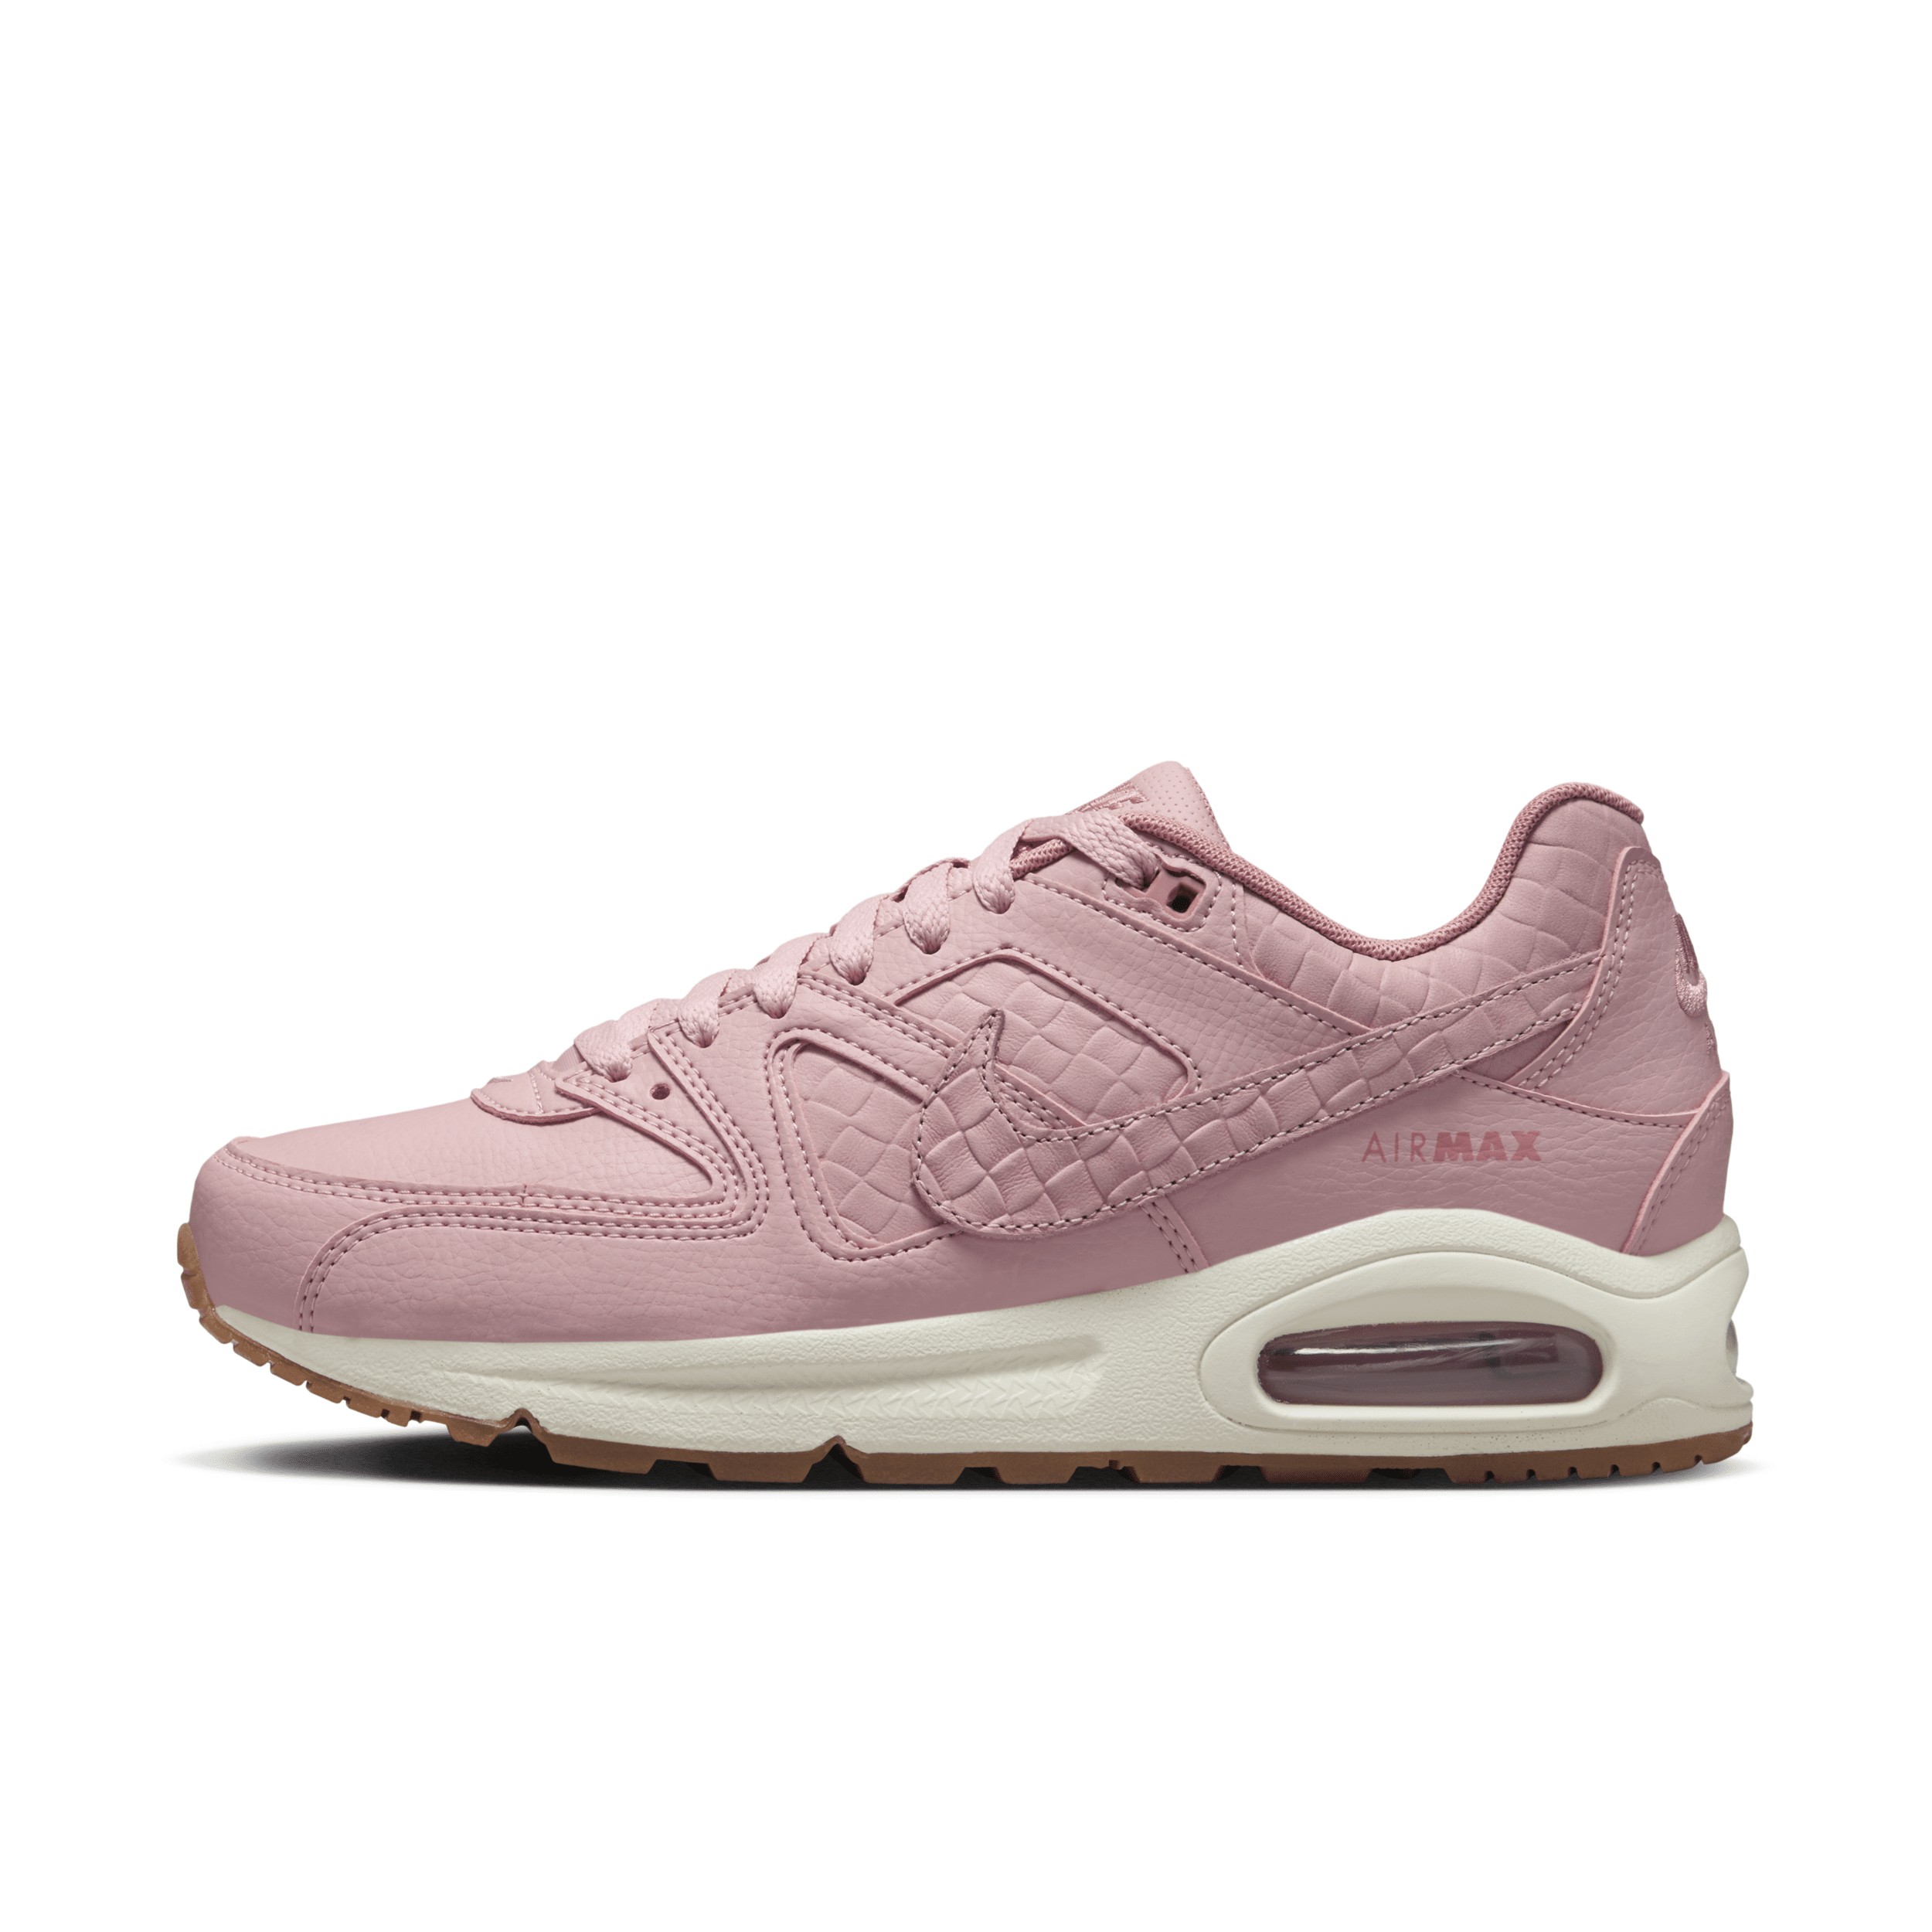 Nike Women's Air Max Command Premium Shoes In Pink